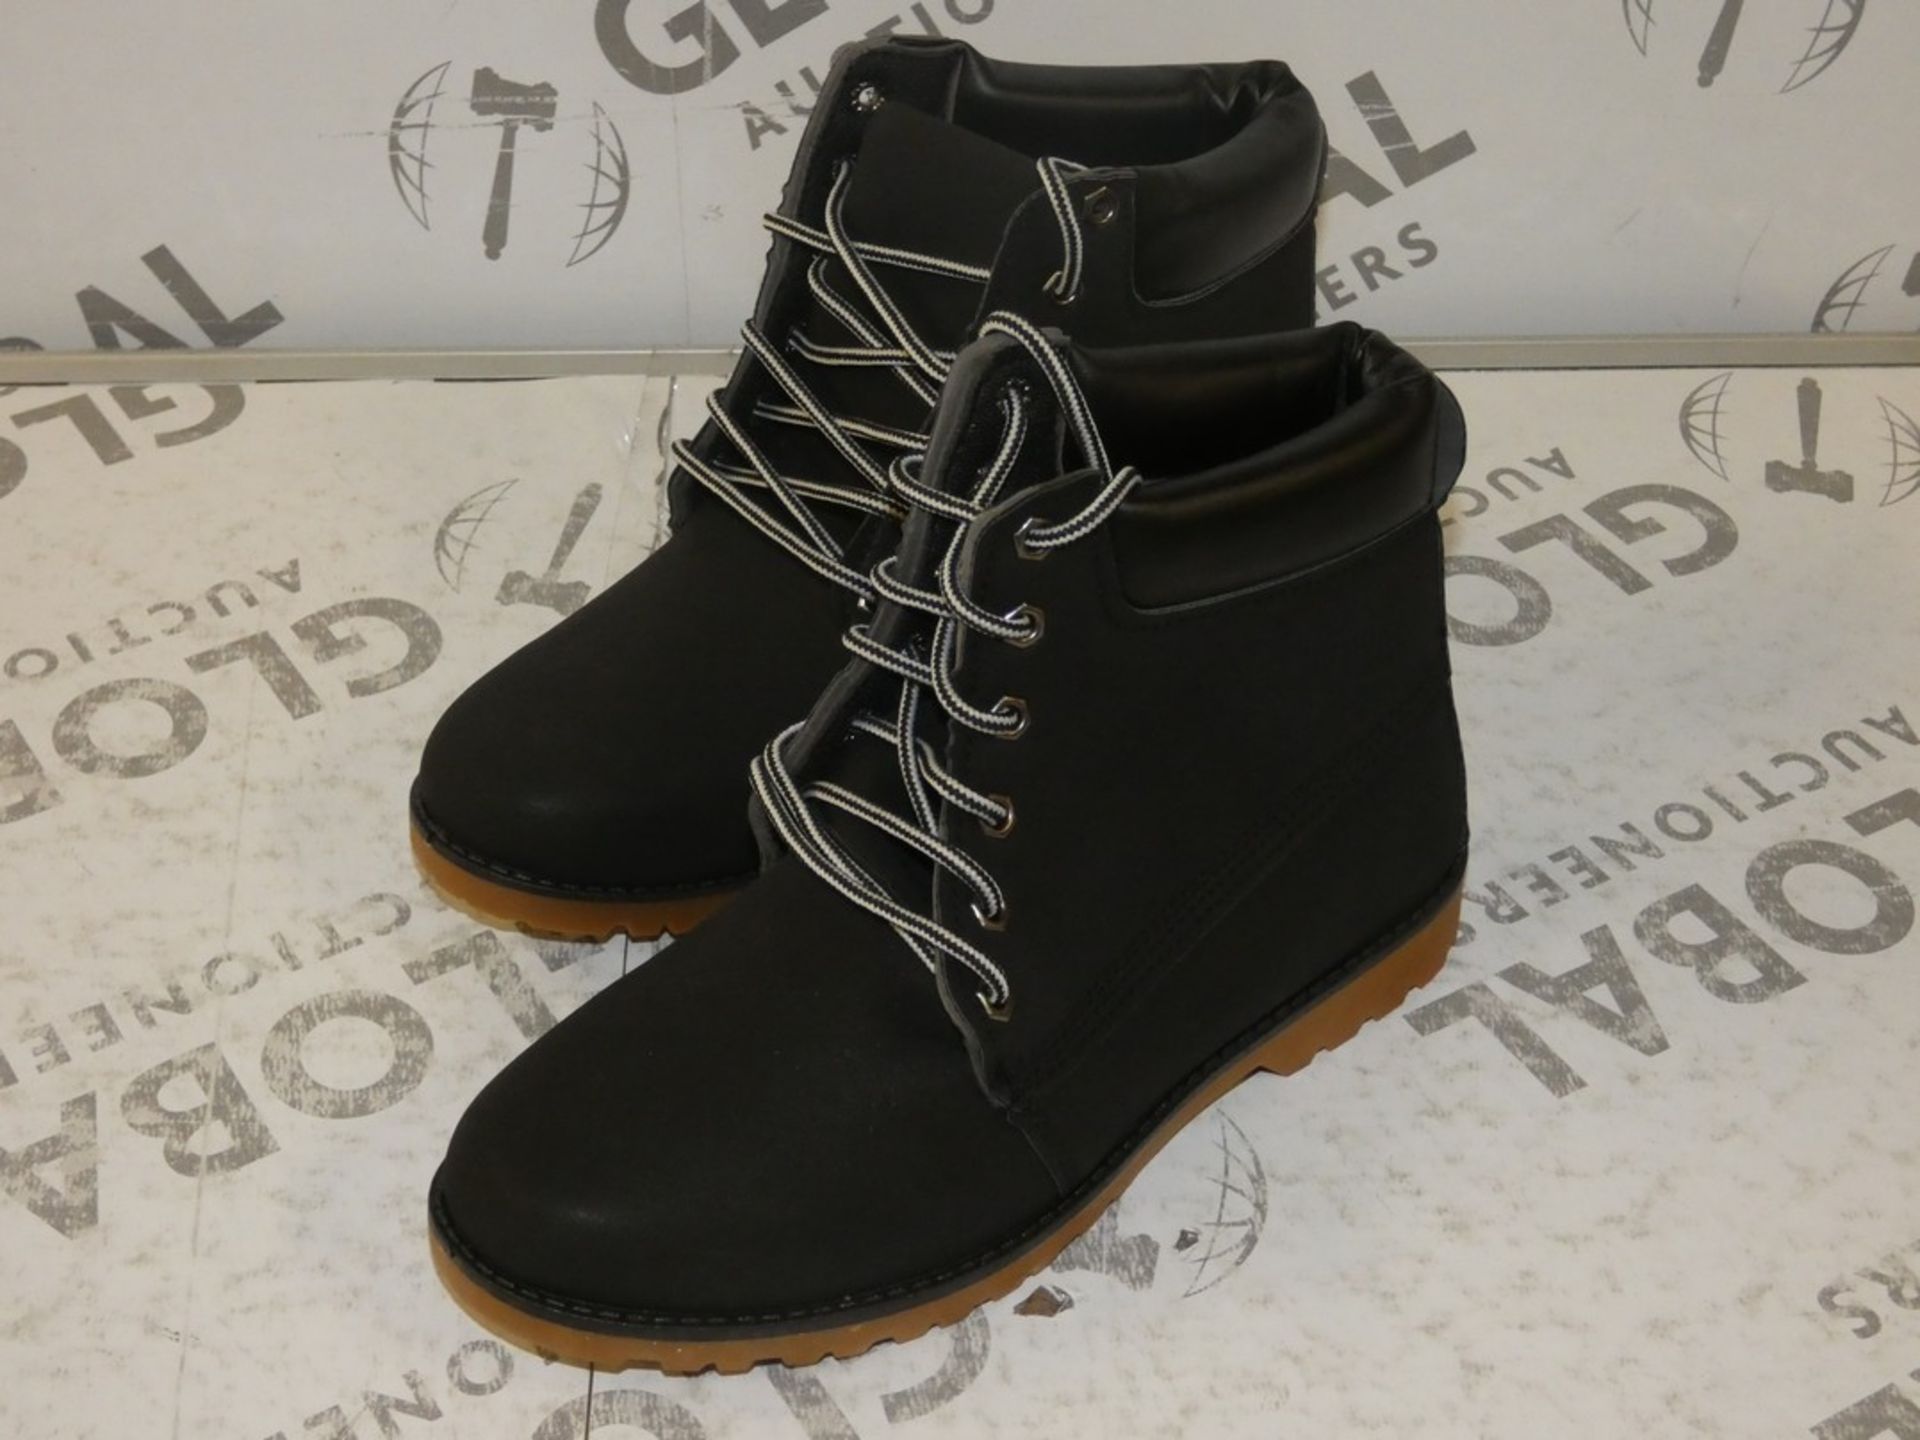 Lot to Contain 2 Brand New Pairs of Size EU39 Black Boots